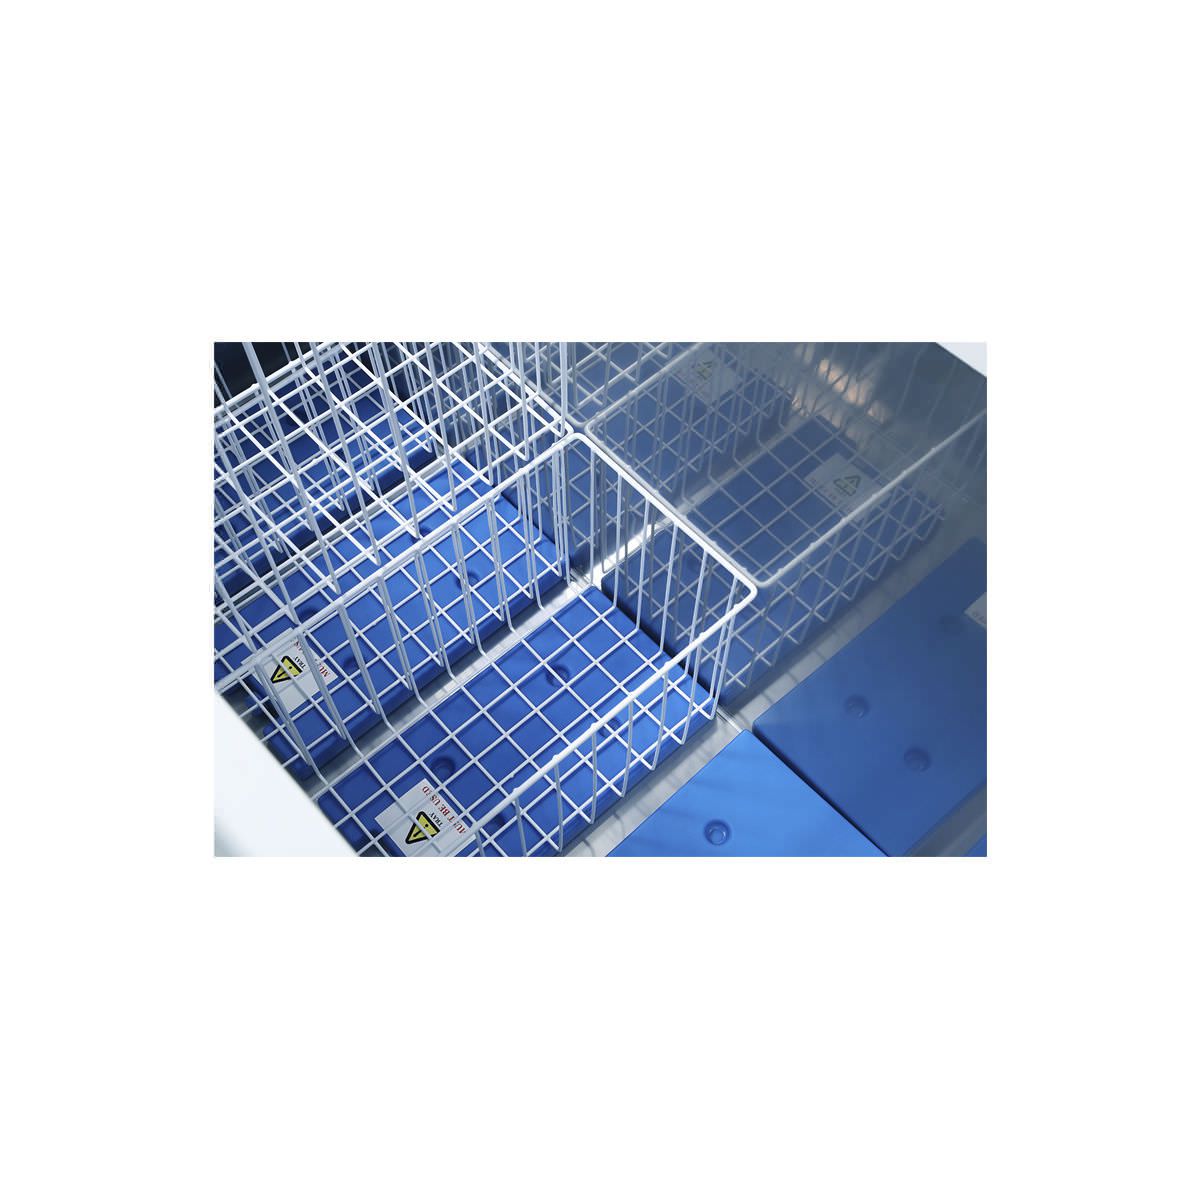 Pharmacy refrigerator / chest / 1-door 2 °C ... 8 °C, 211 L | HBC-340 Haier Medical and Laboratory Products